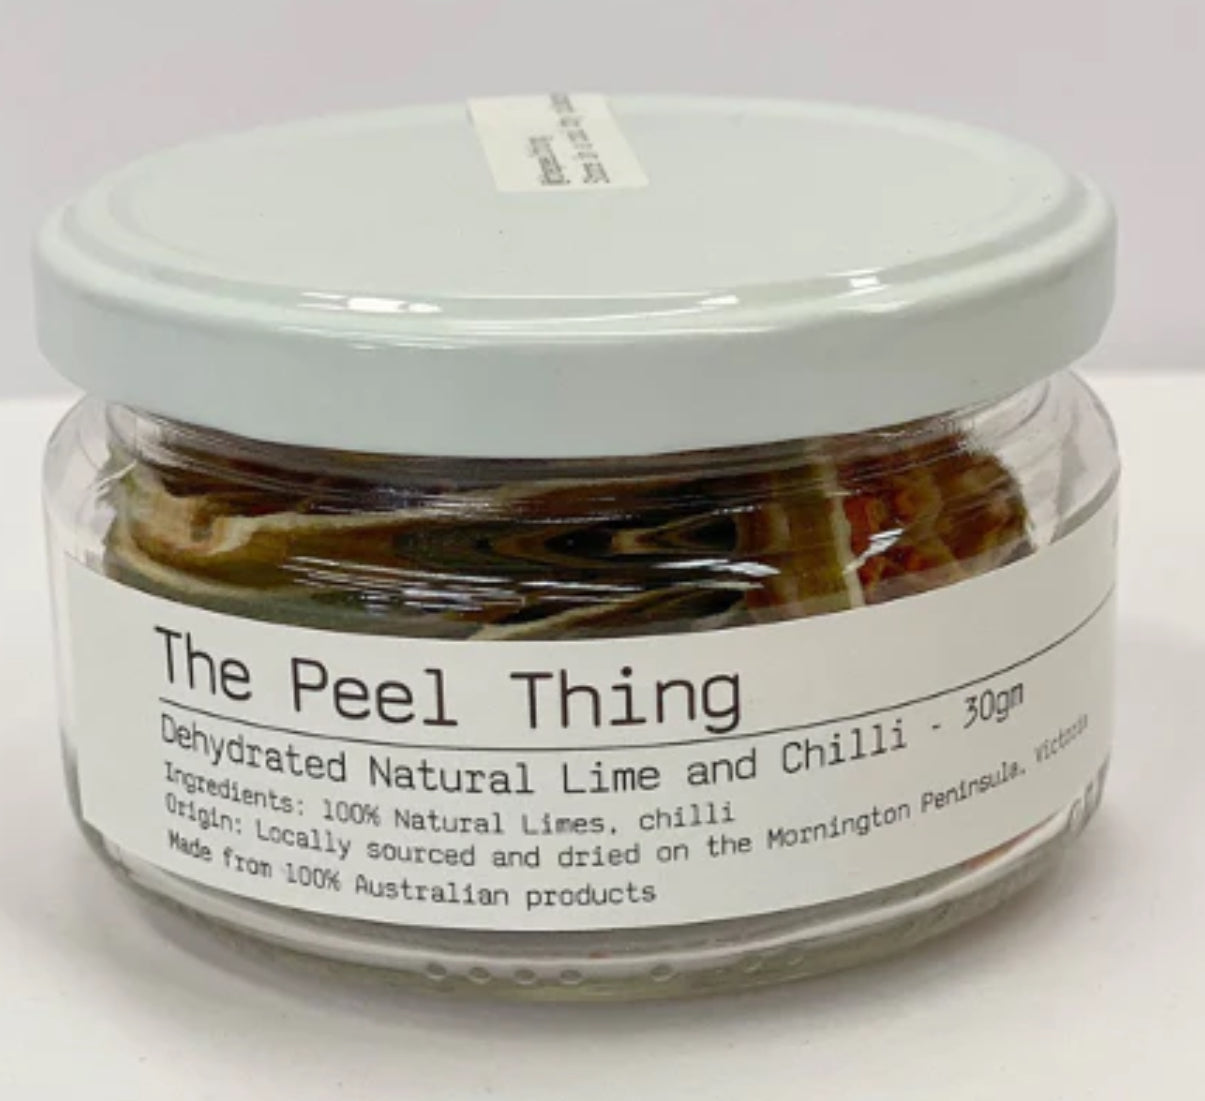 The Peel Thing Dehydrated Natural Lime and Chilli 30g